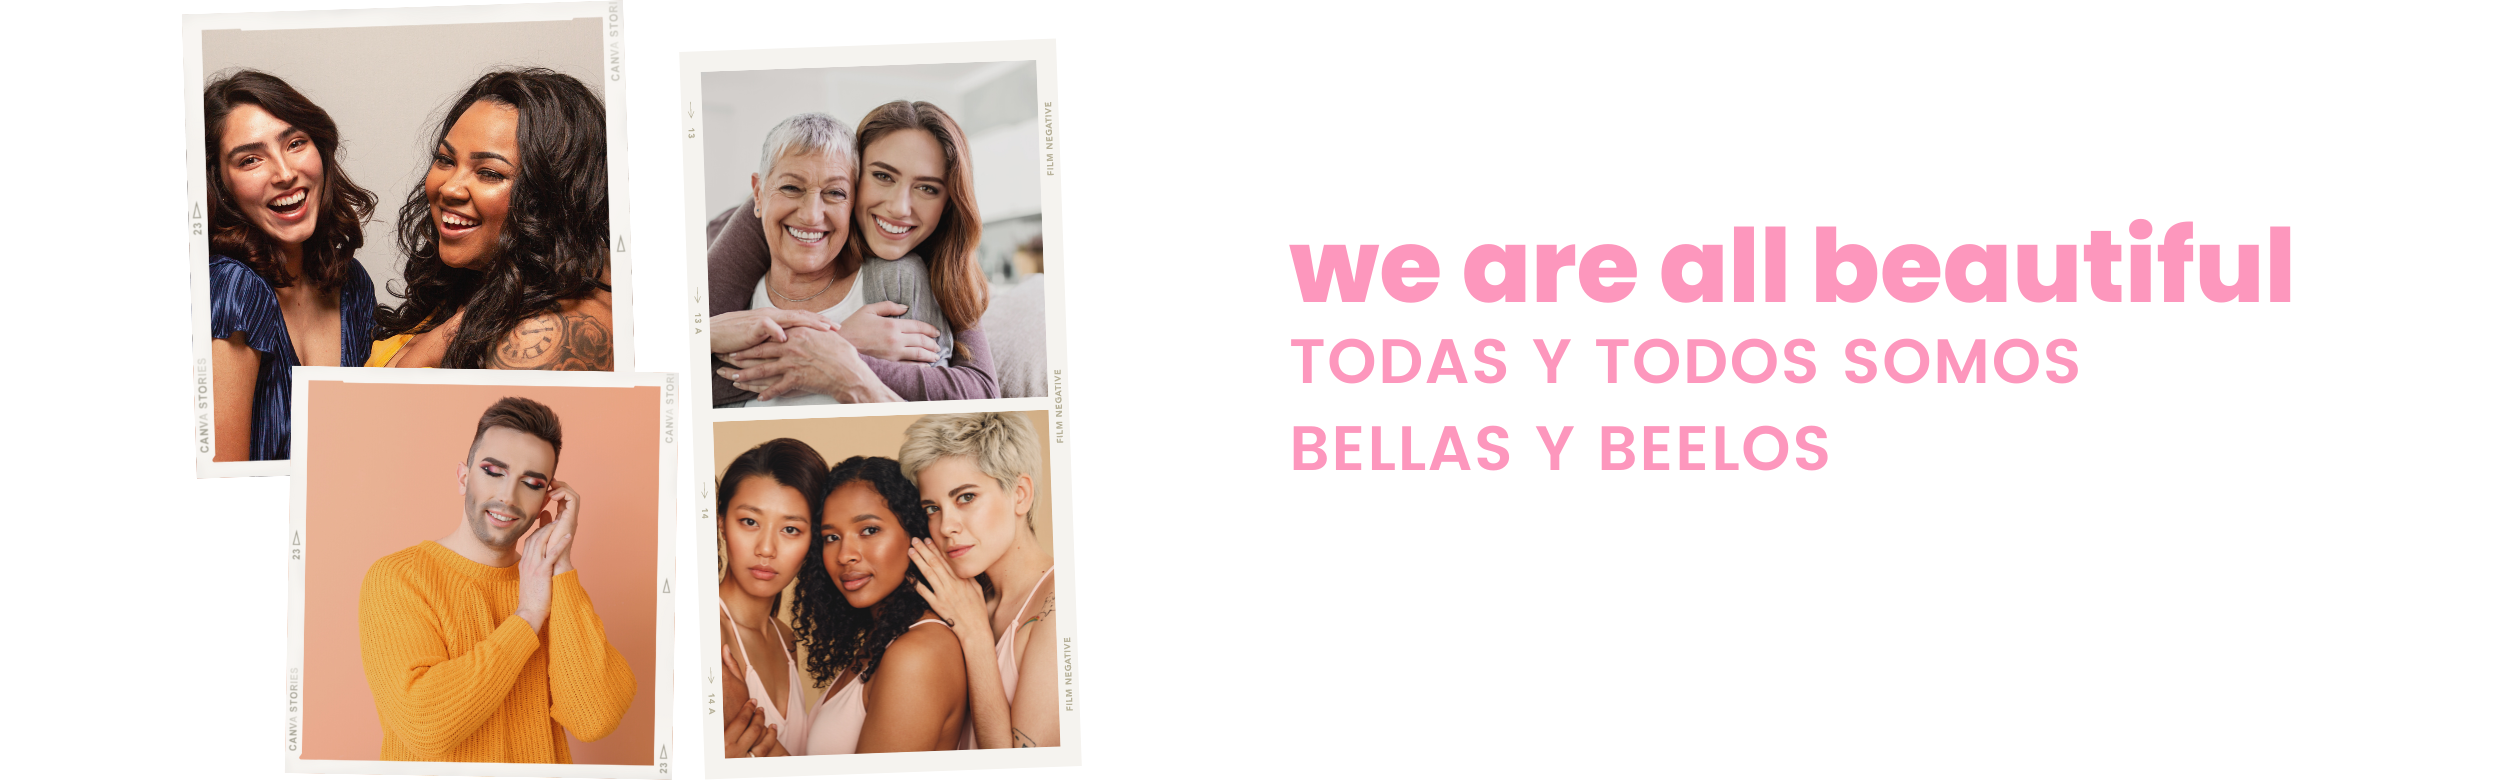 glamour_us_glamourus_makeup_beauty_cosmetics_skincare_store_shop_online_small_business_woman_owned_latina_founded_tienda_latina_belleza_maquillaje_